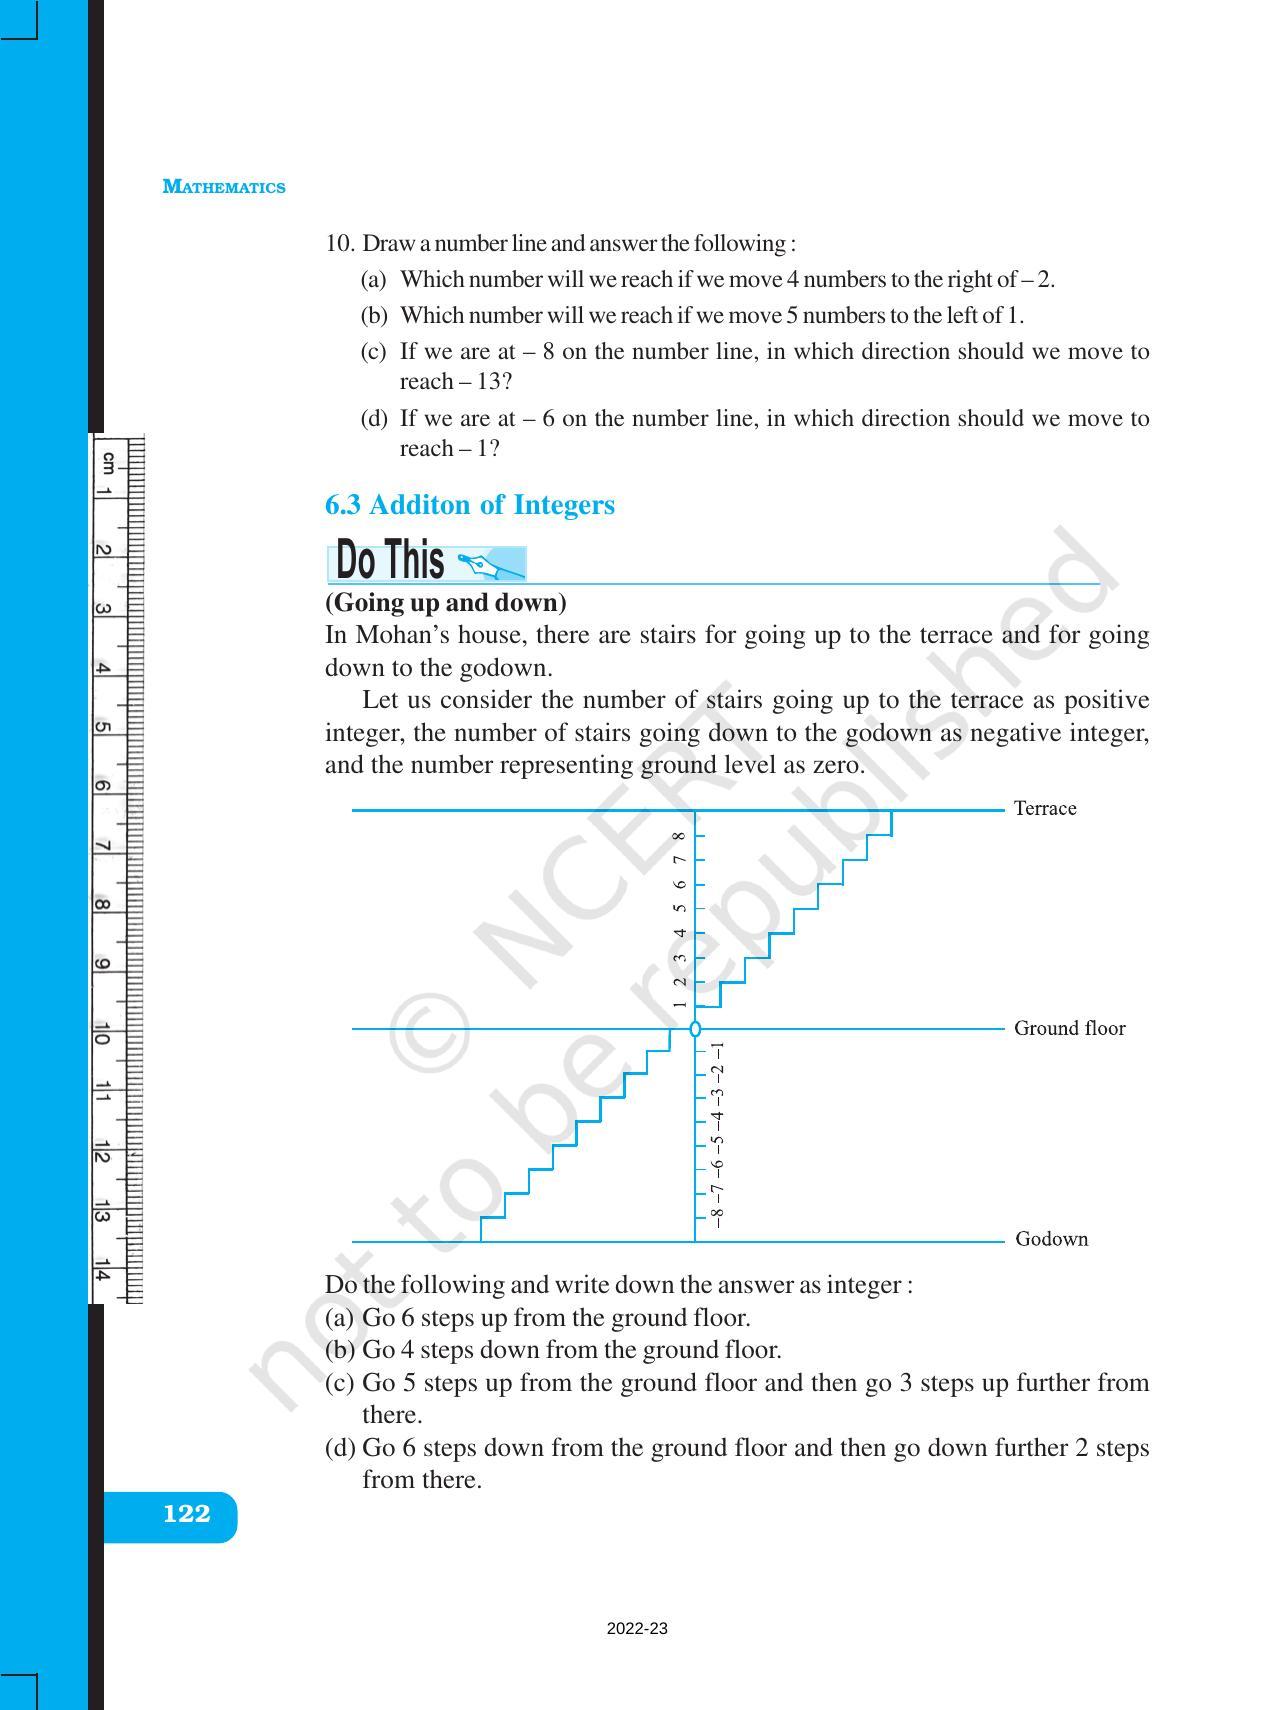 NCERT Book for Class 6 Maths: Chapter 6-Integers - Page 10